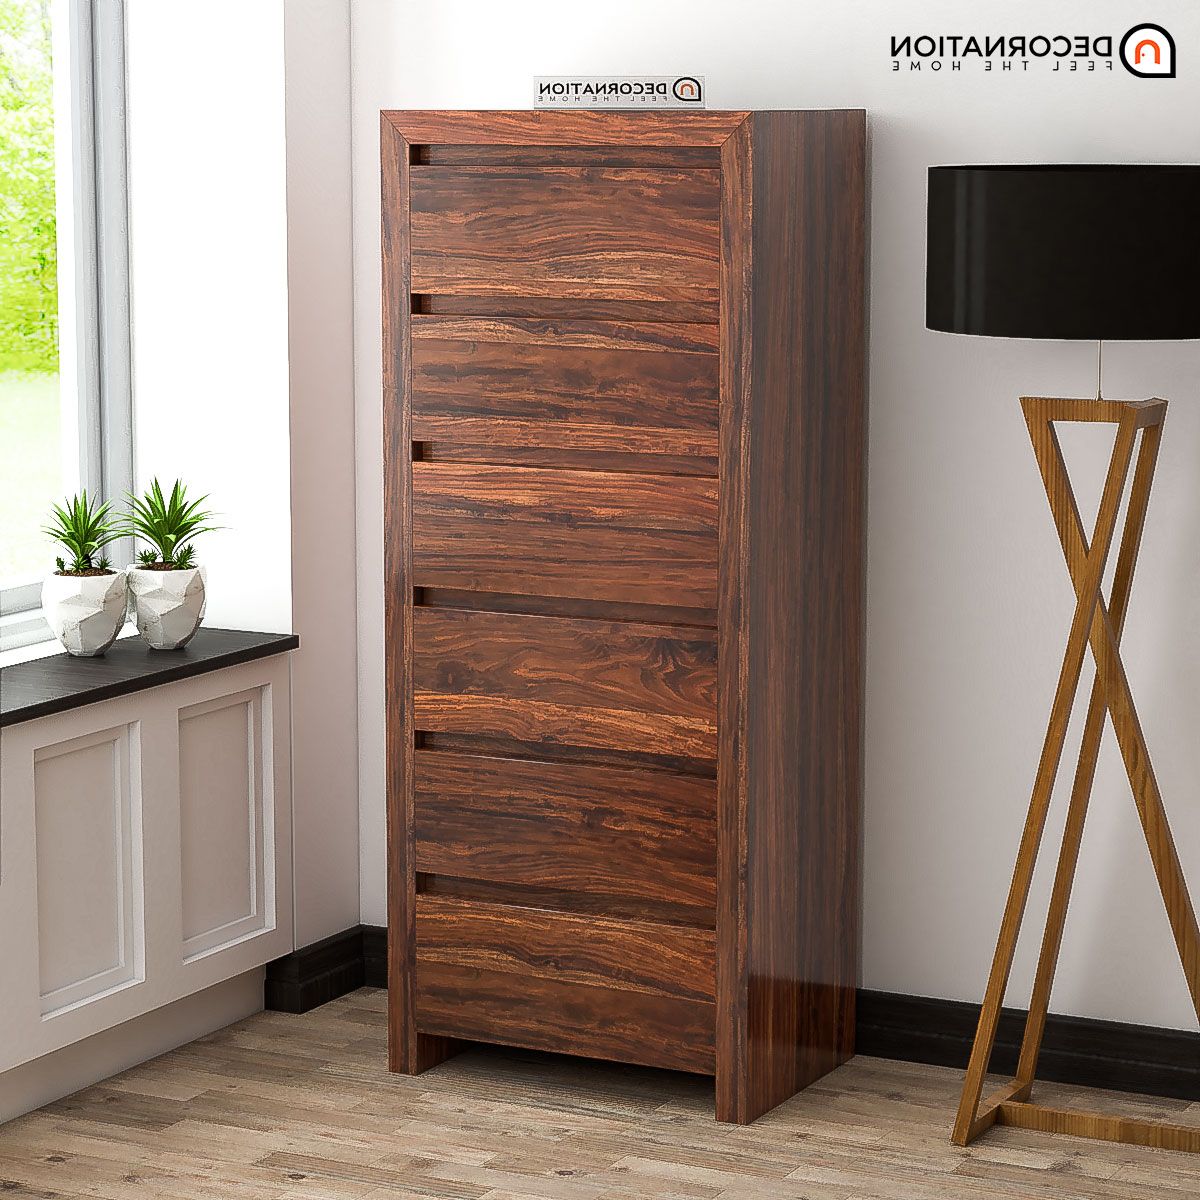 Adara Wooden Storage Cabinet – Natural Finish – Decornation Regarding Wood Cabinet With Drawers (View 3 of 20)